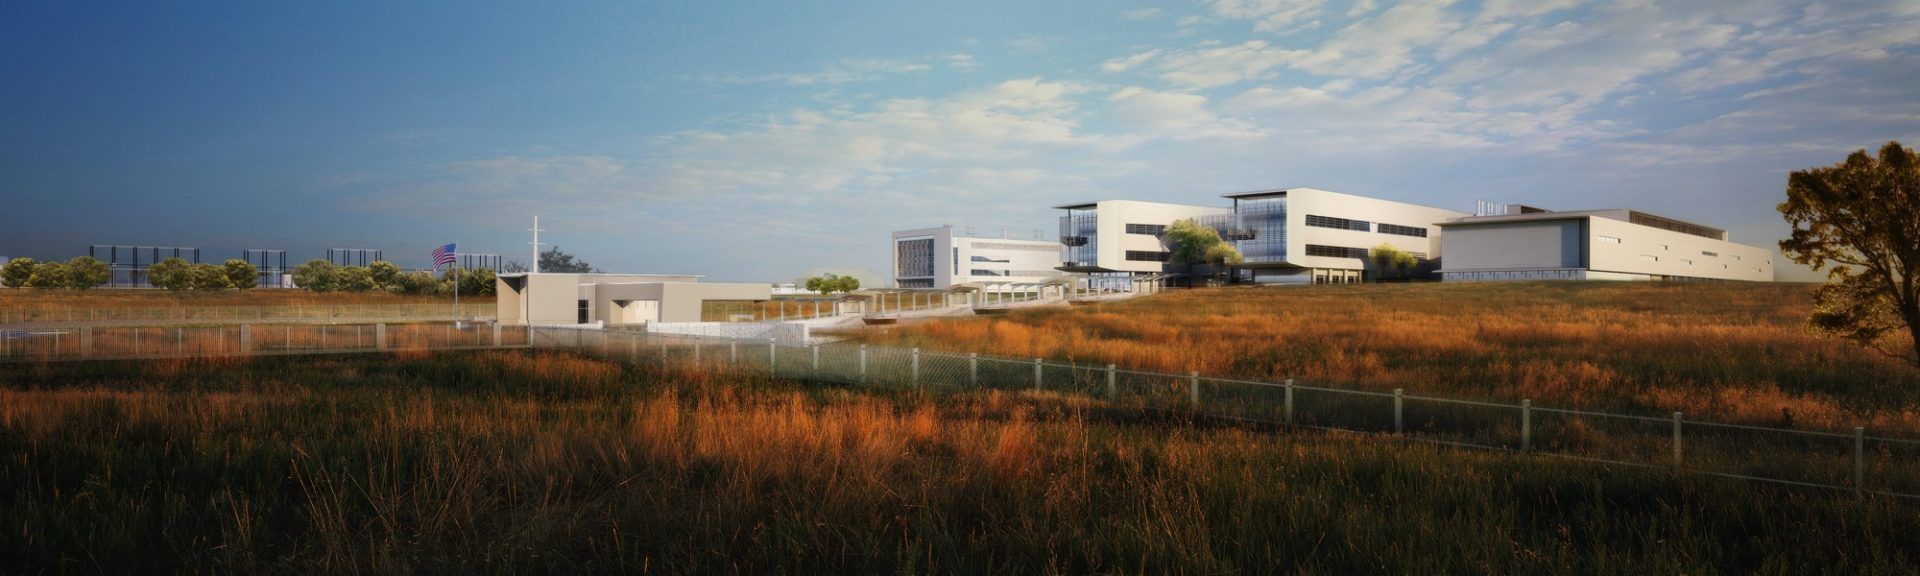 Architectural rendering of the new NBAF facility at Kansas State University in Manhattan, Kansas. Courtesy of Ron Trewyn / Department of Homeland Security